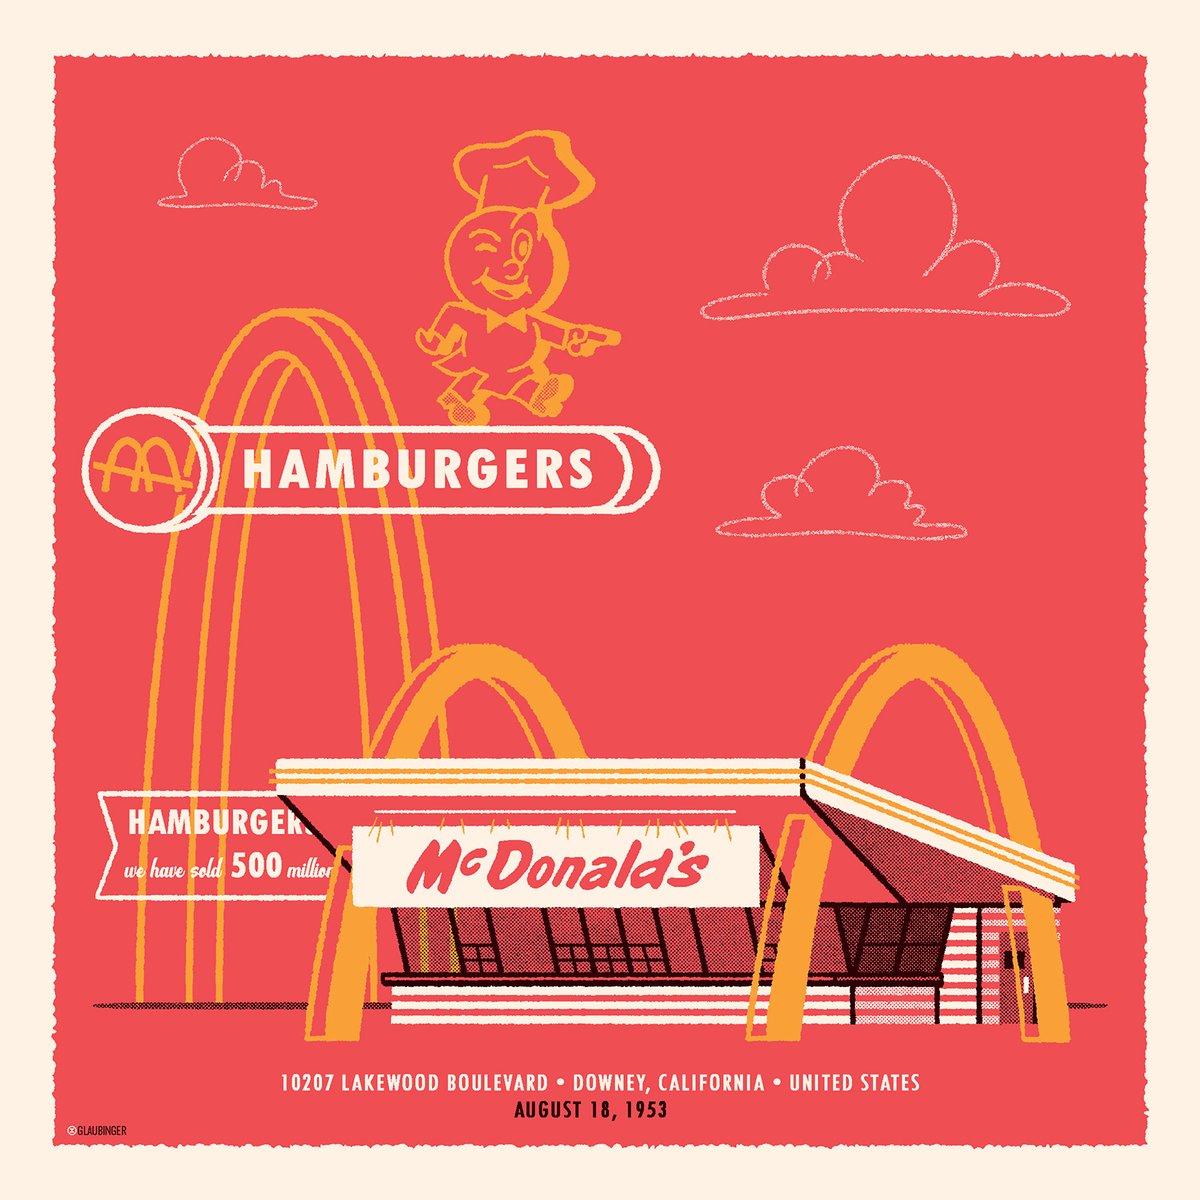 Hamburgers. Neon signs. Americana. Mid century architecture. What's not to love?

I've paid tribute to the oldest (but not the original) McDonald's restaurant which is located in Downey, California.

Screen print coming soon!

#mcdonalds #speedee #downeycalifornia #hambugers